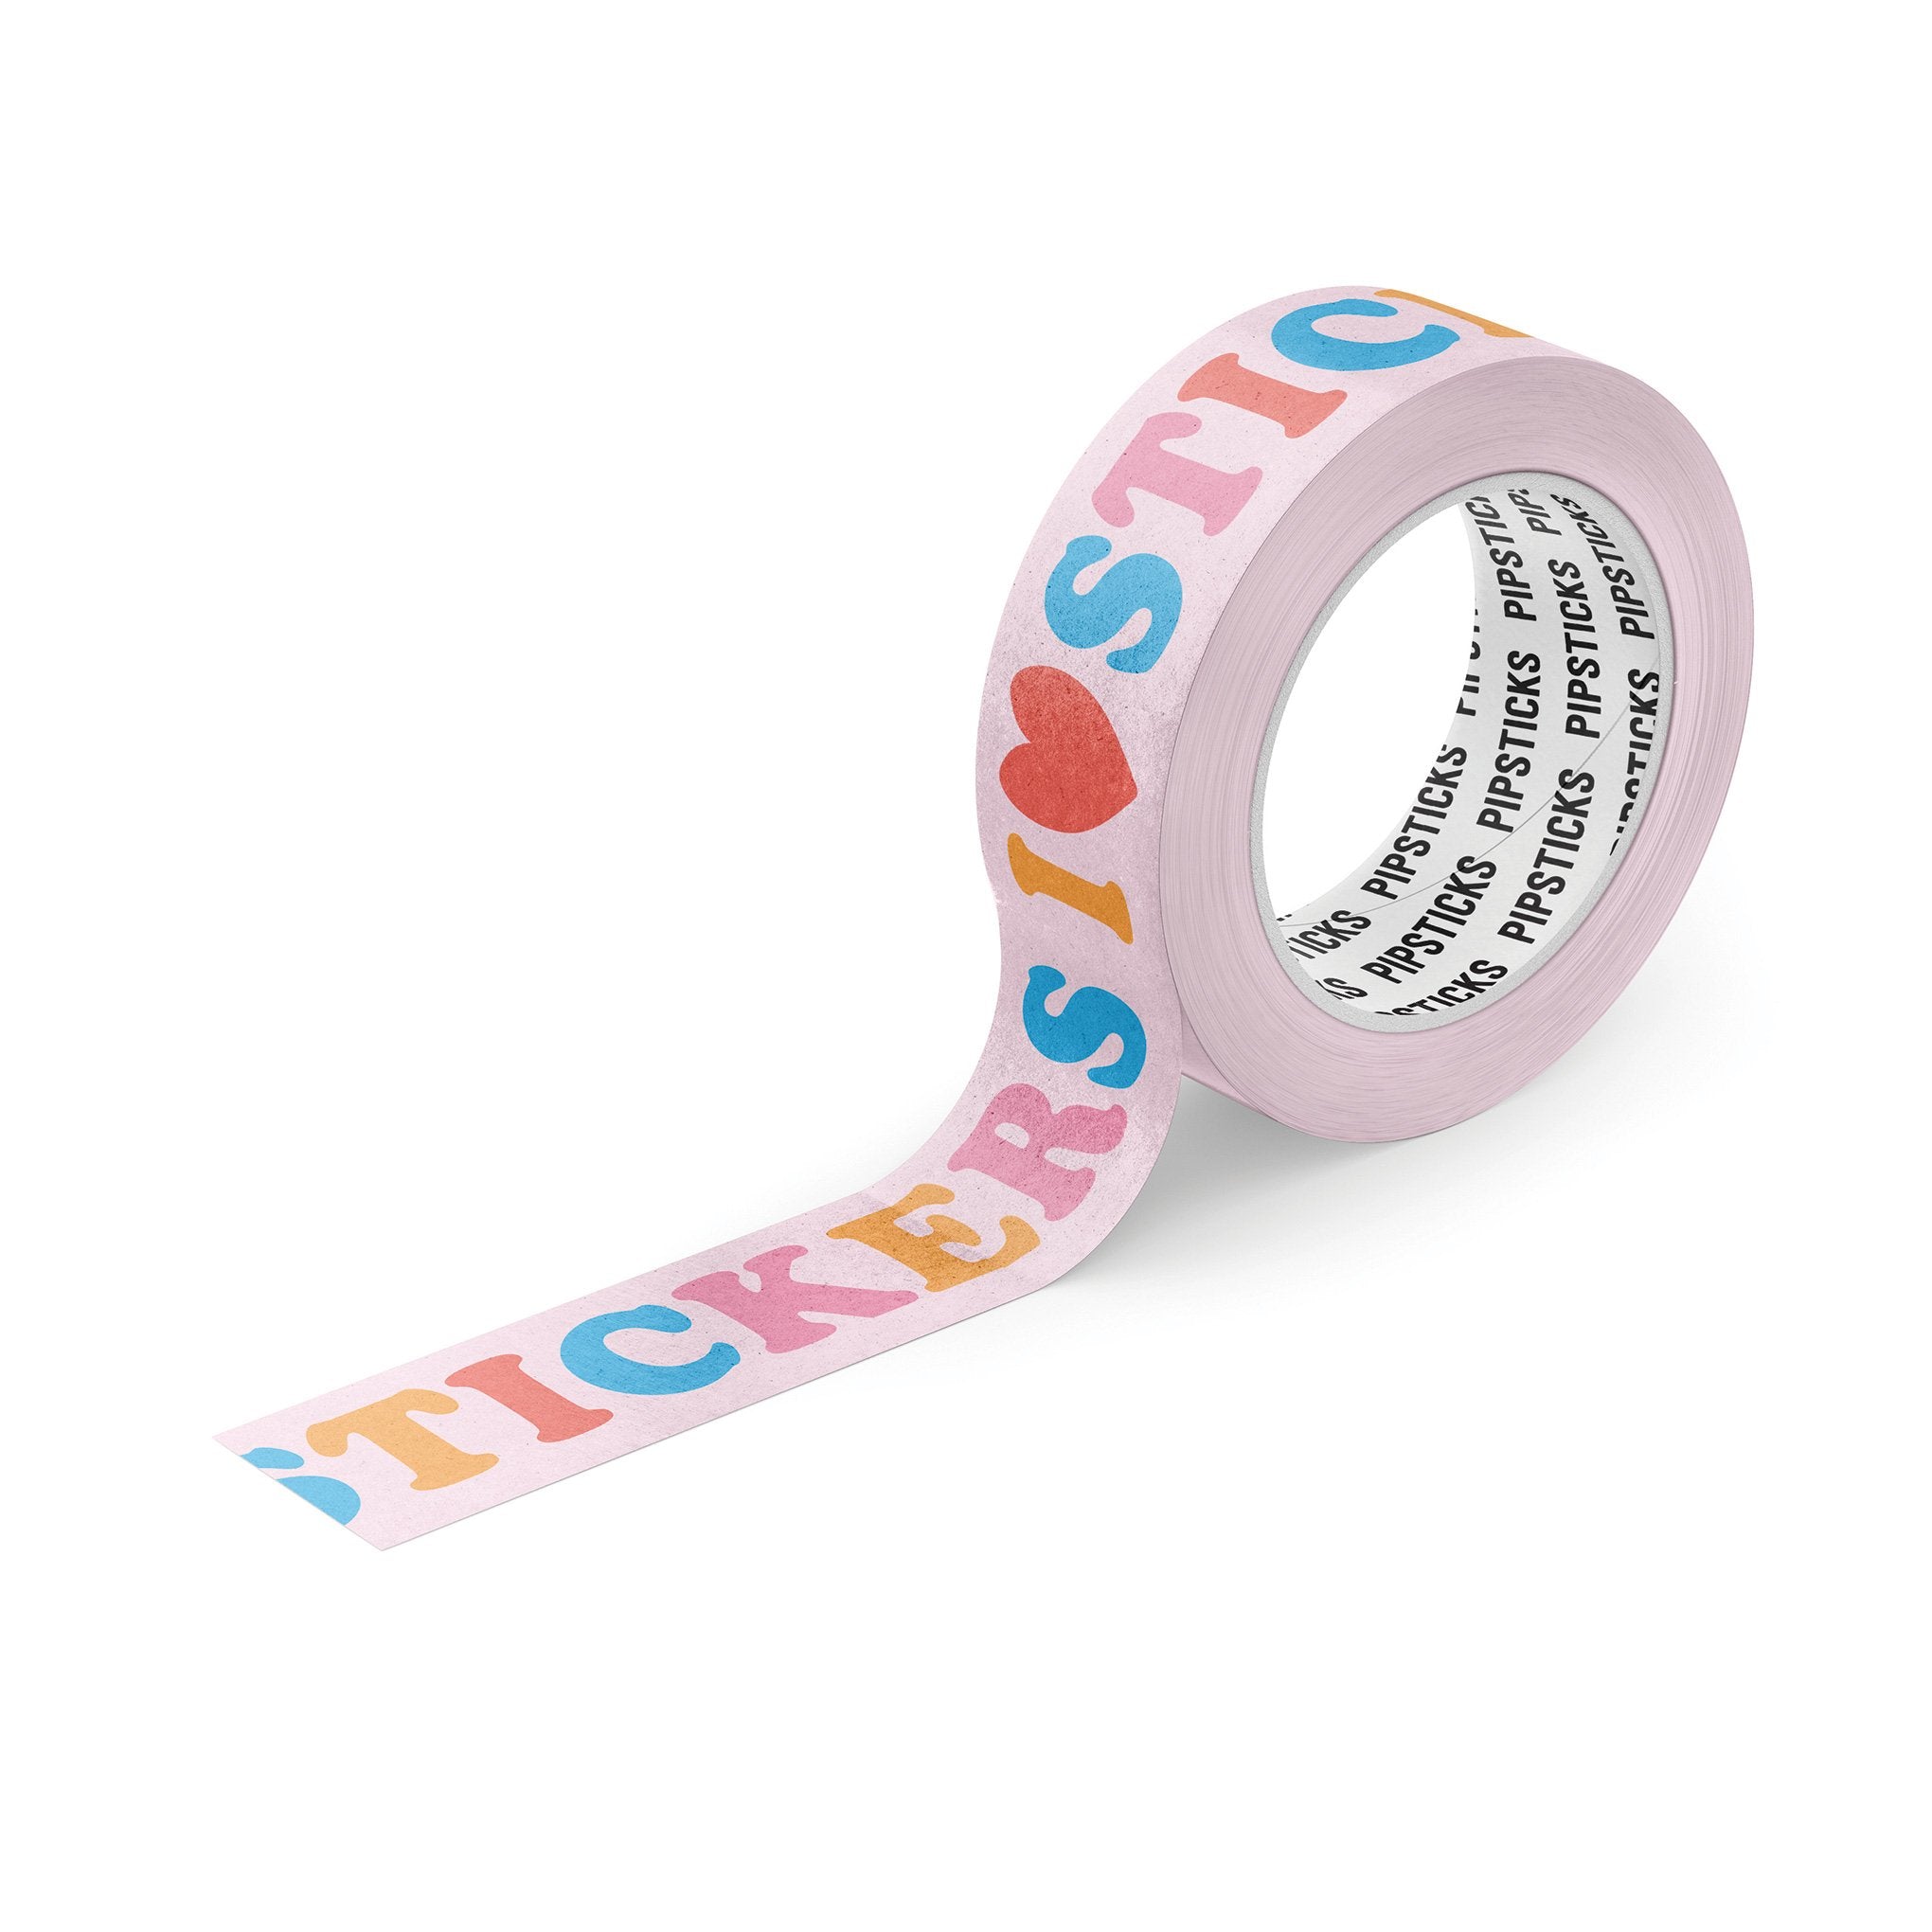 Sent with Love Washi Tape